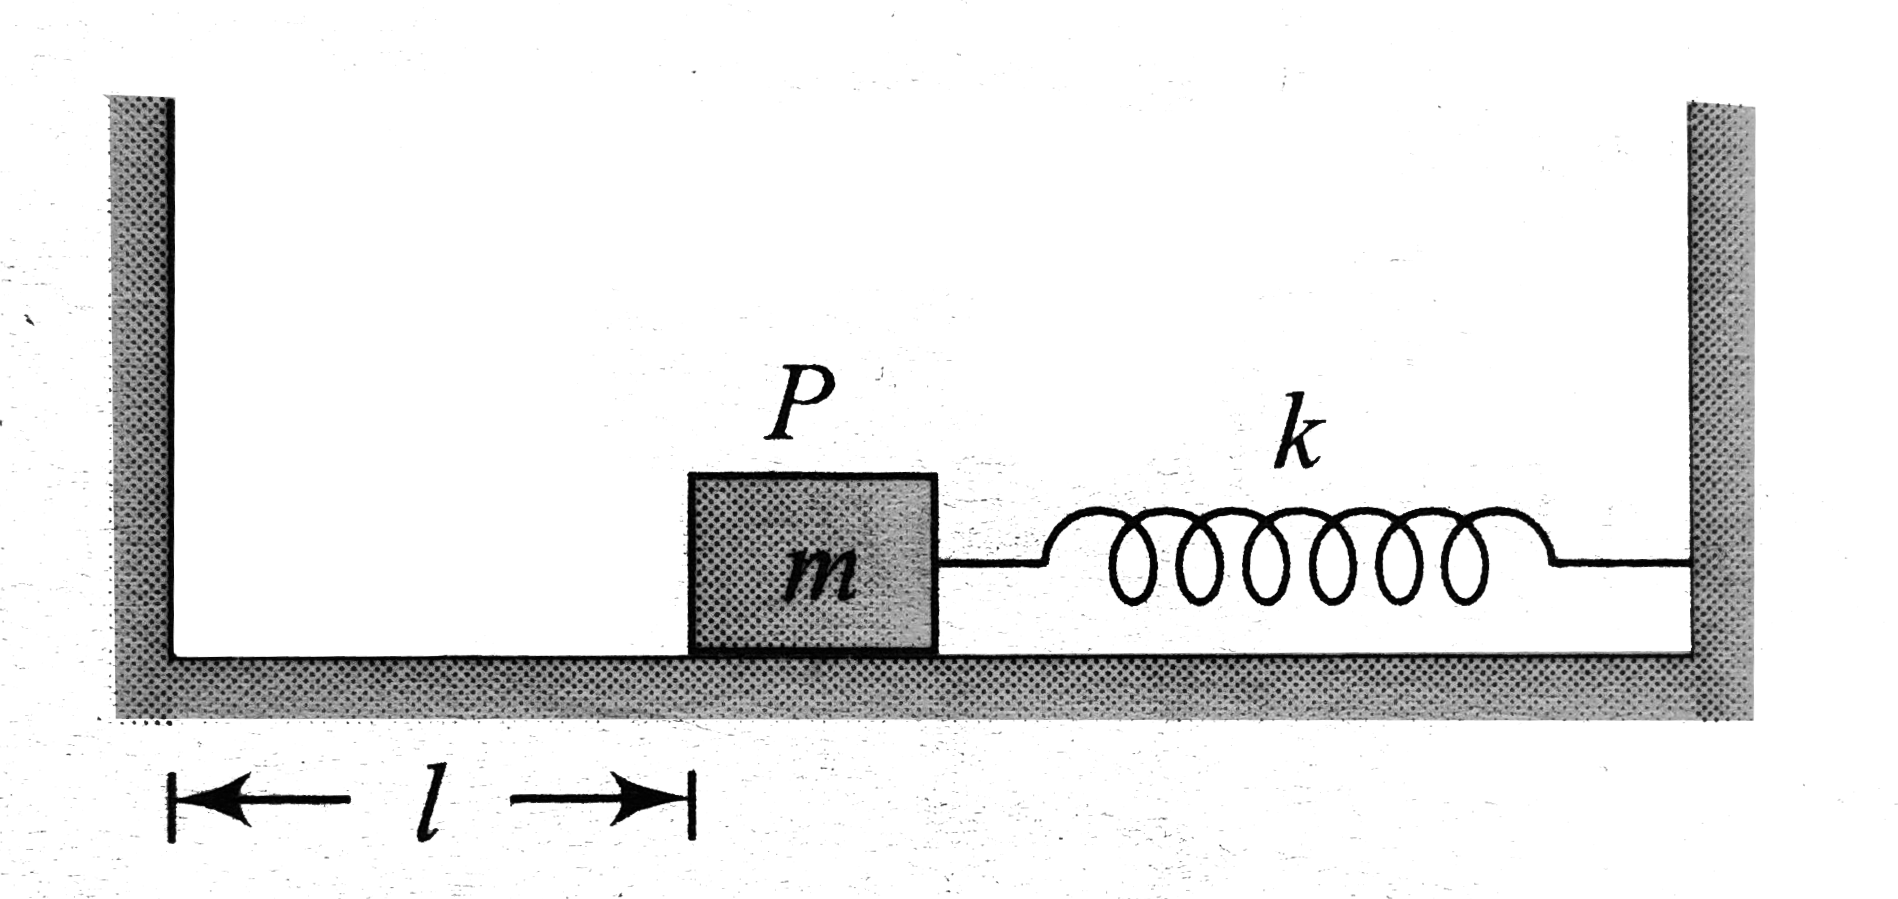 Figure shows a block P of mass m resting on a smooth floor at a distance l from a rigid wall. Block is pushed towards right by a distance 3//2 and released. When block passes from its mean  position another block of mass m(1) is dropped over it, find the minimum value of m(1) so that the combined block just collides with the left wall.